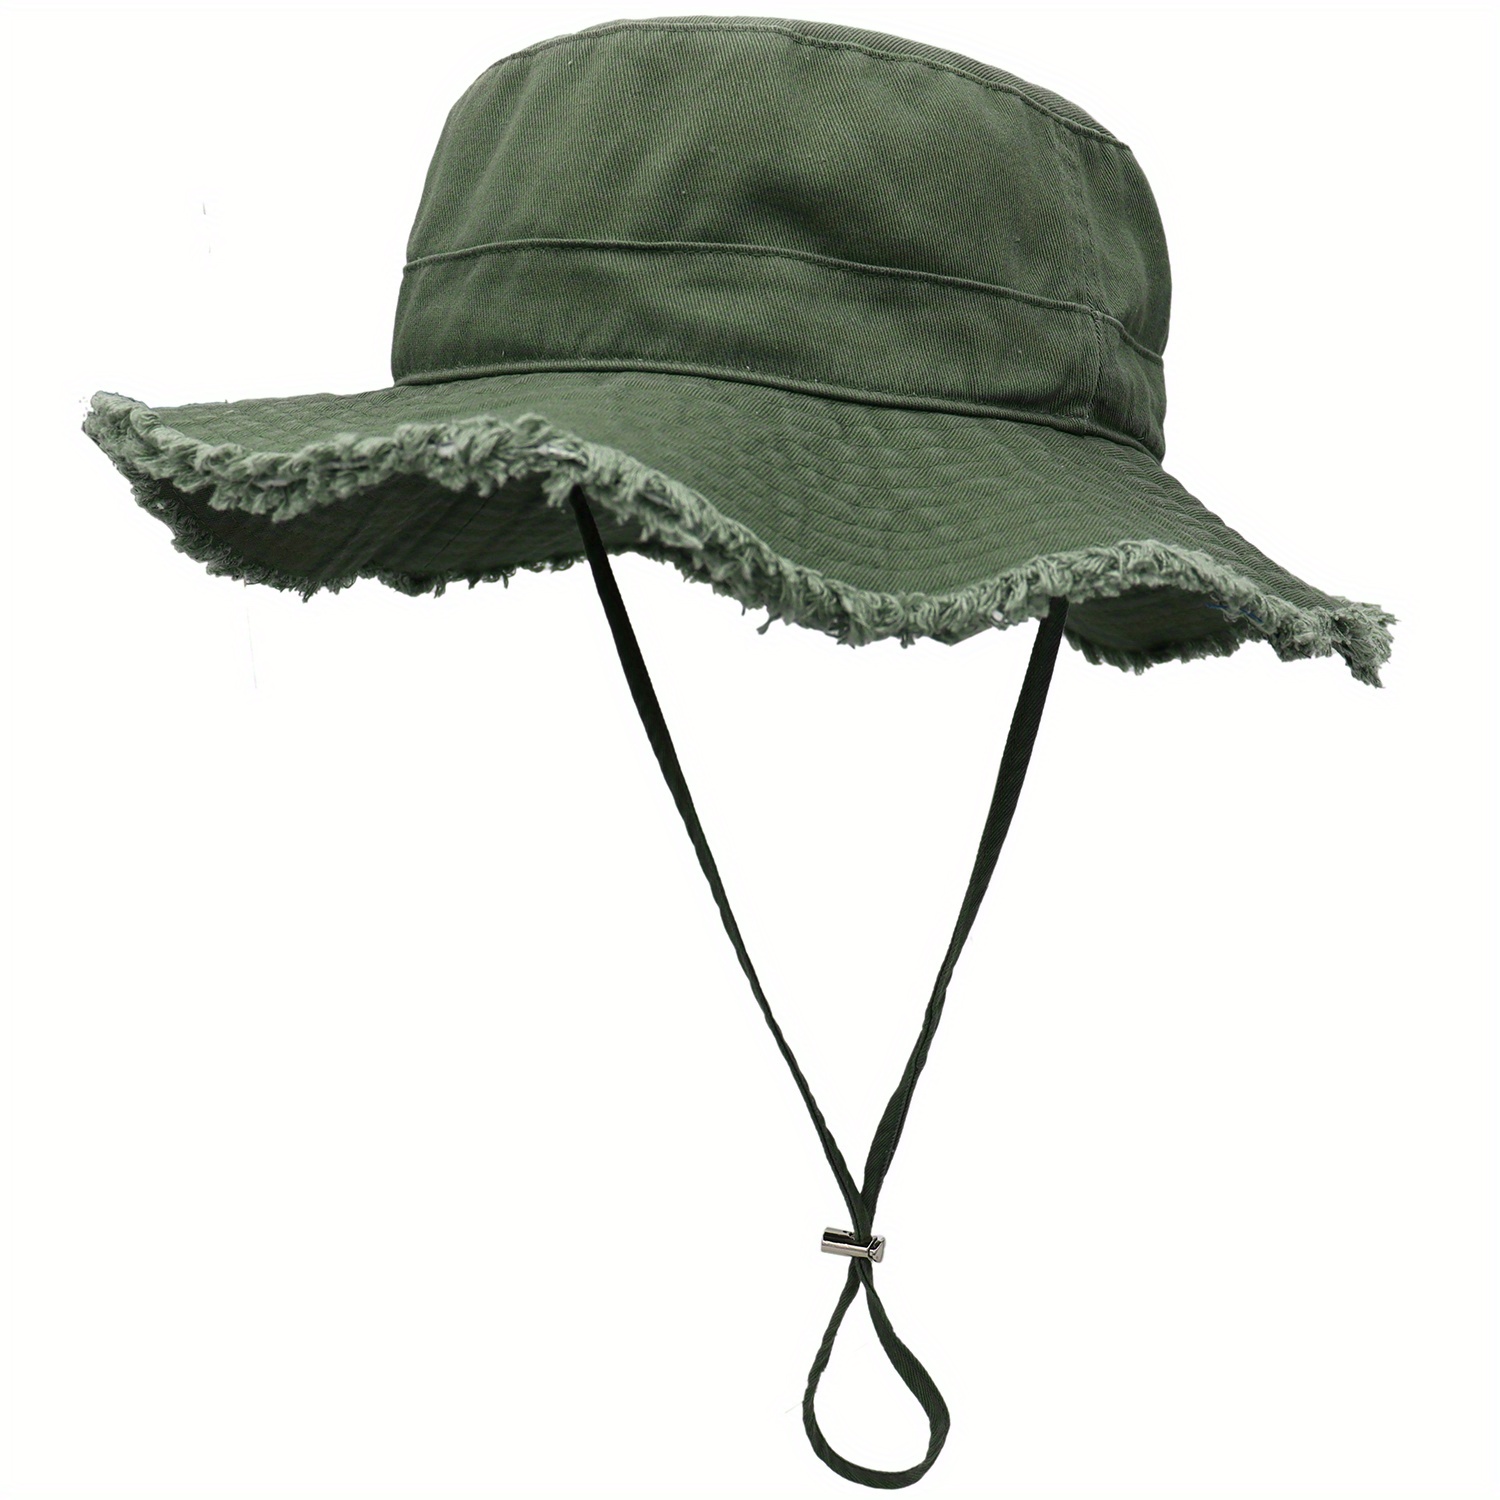 JCREW MENS SHORT BRIMMED VENTED FISHING HAT UNISEX ARMY GREEN